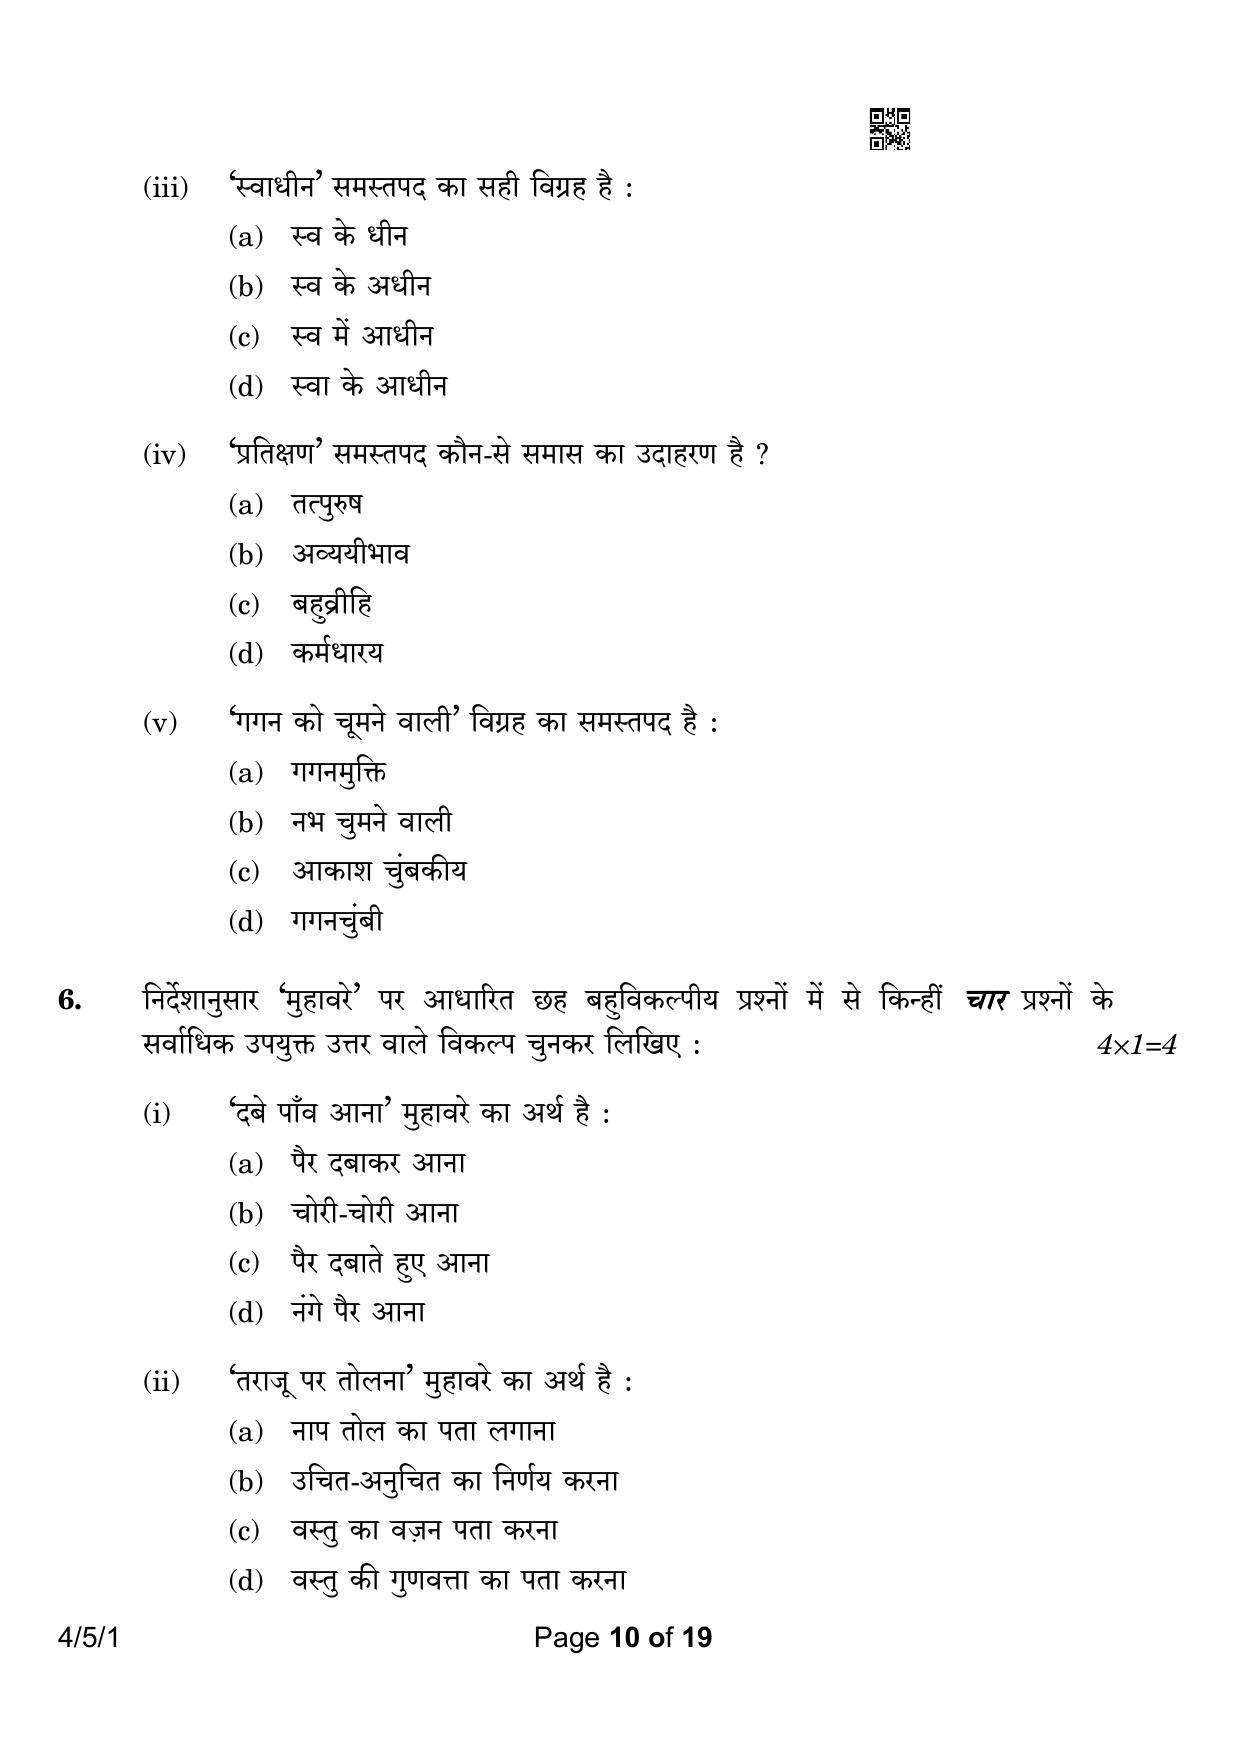 CBSE Class 10 4-5-1 Hindi B 2023 Question Paper - Page 10